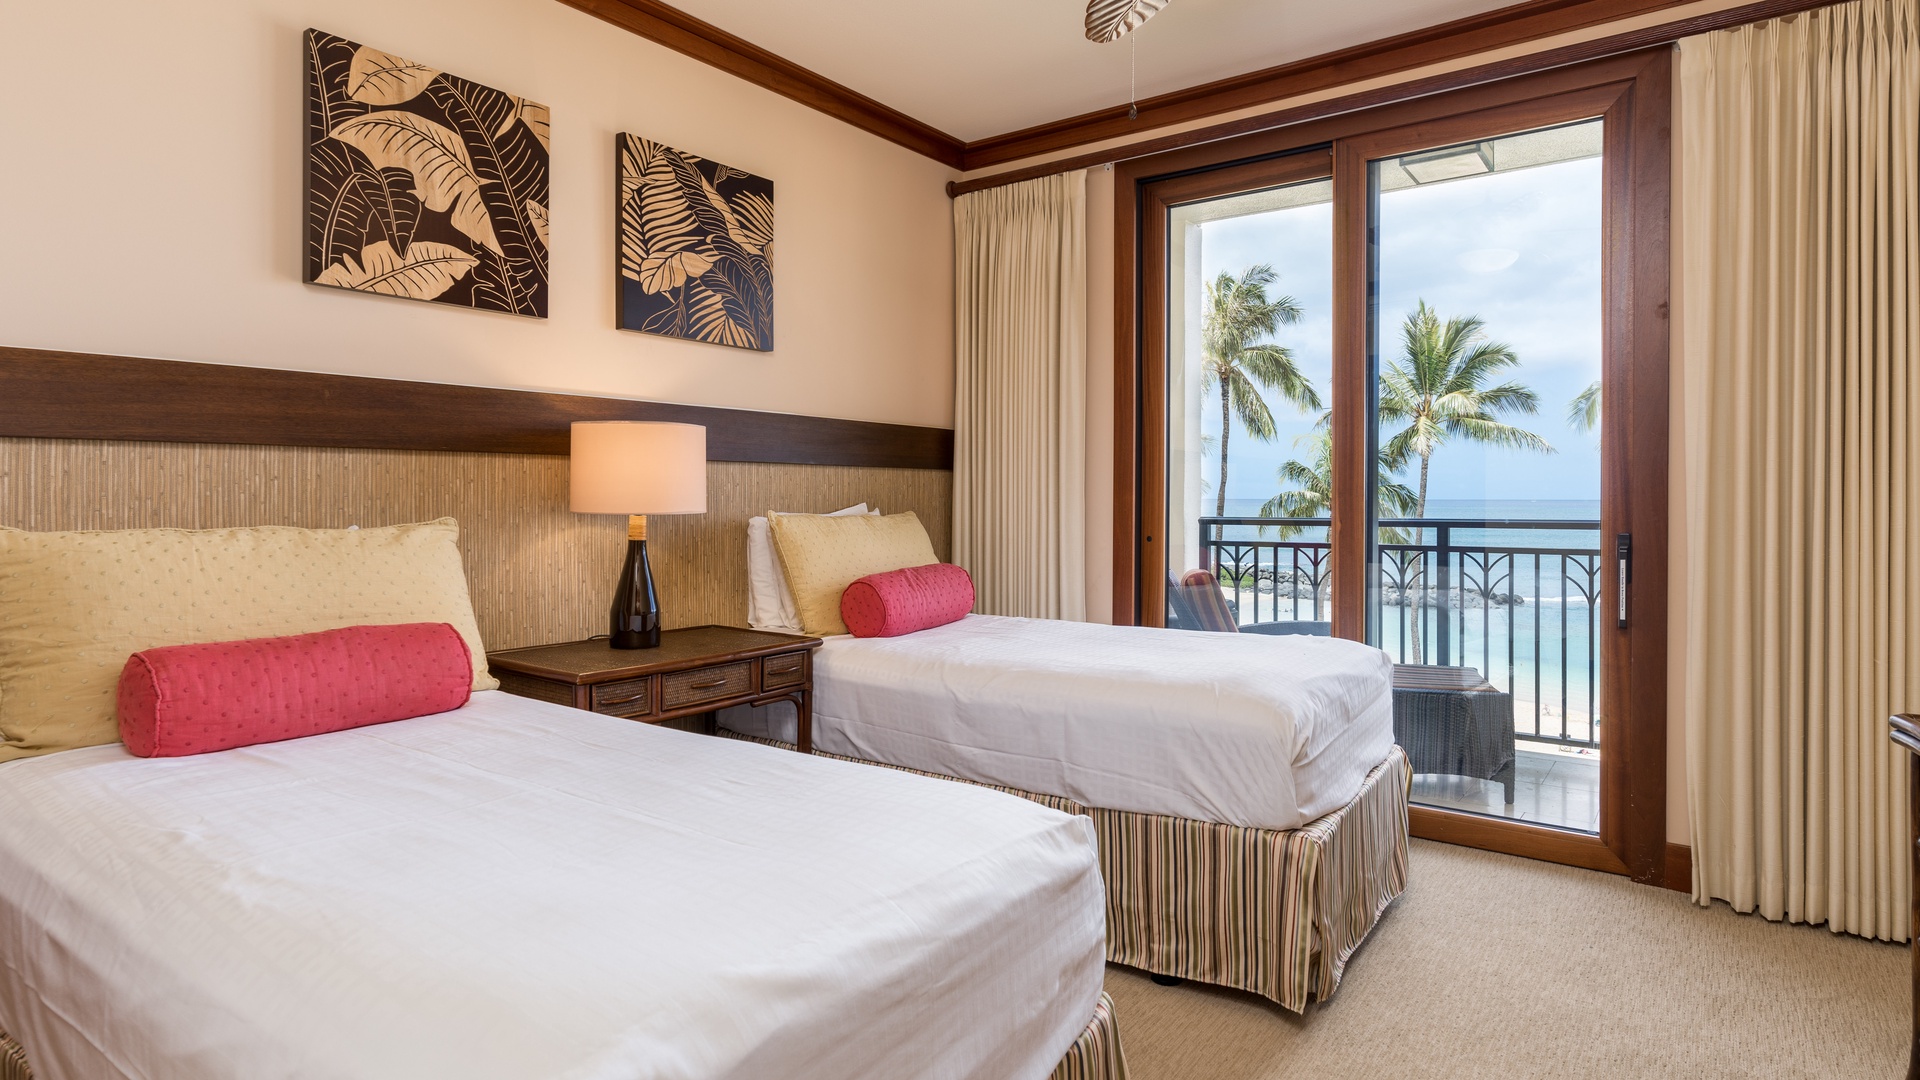 Kapolei Vacation Rentals, Ko Olina Beach Villas B310 - The second guest bedroom with ocean views and twin beds.